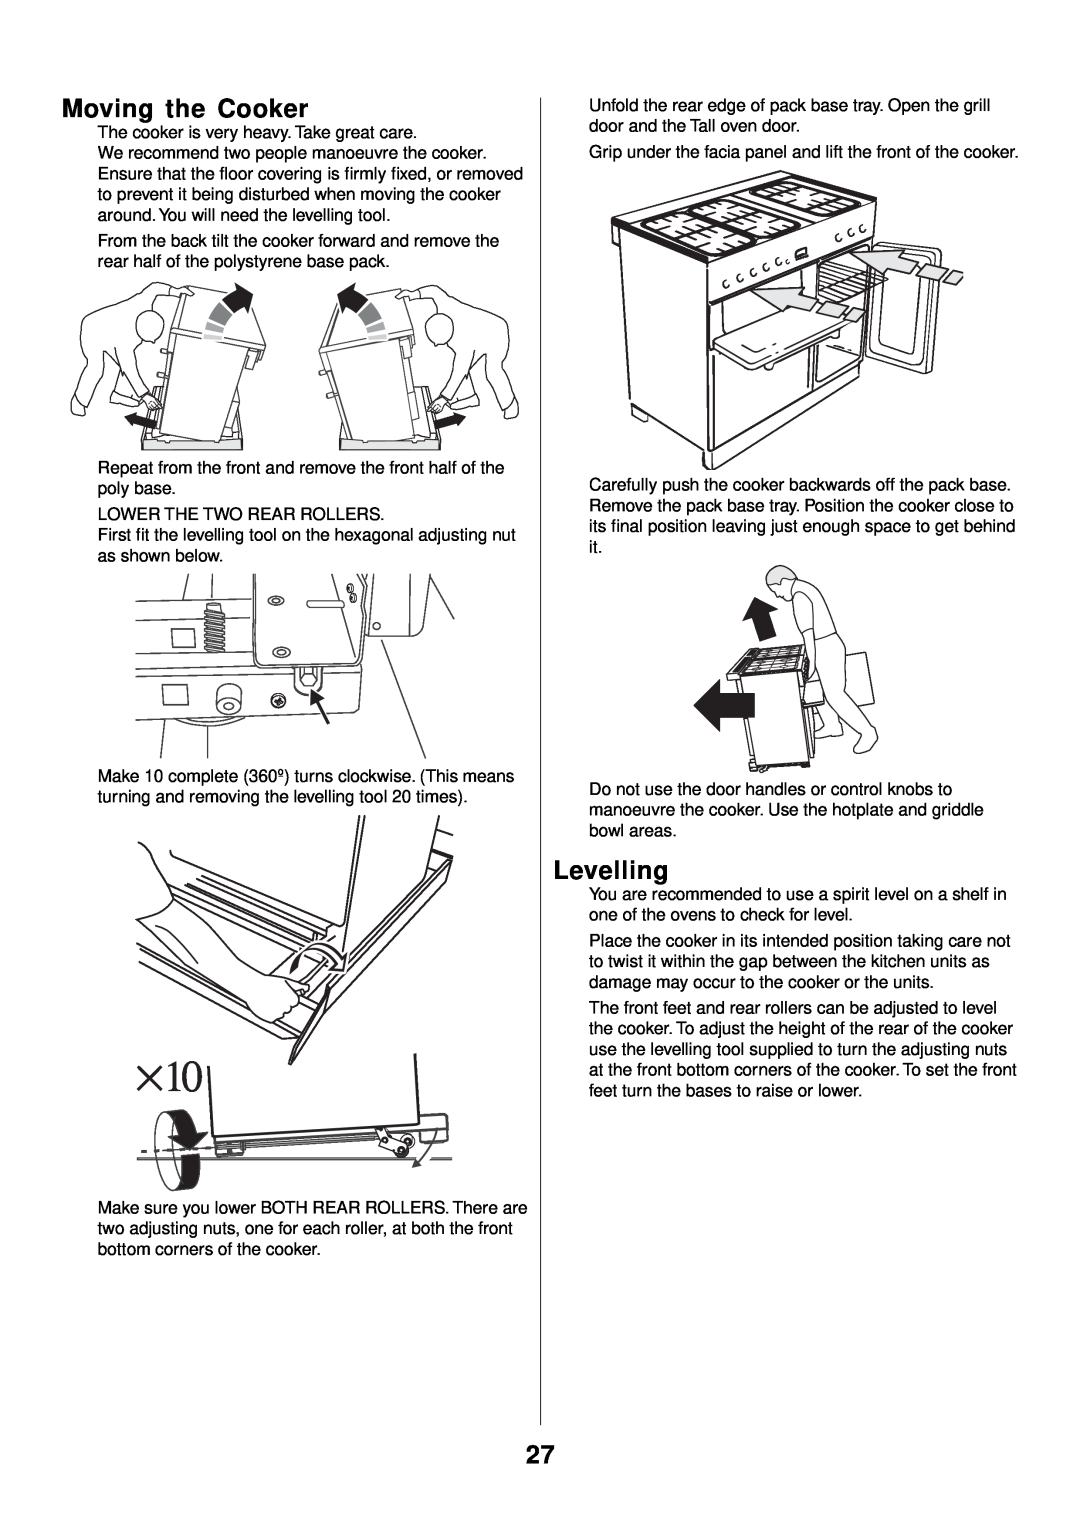 Rangemaster 90 Gas manual Moving the Cooker, Levelling 